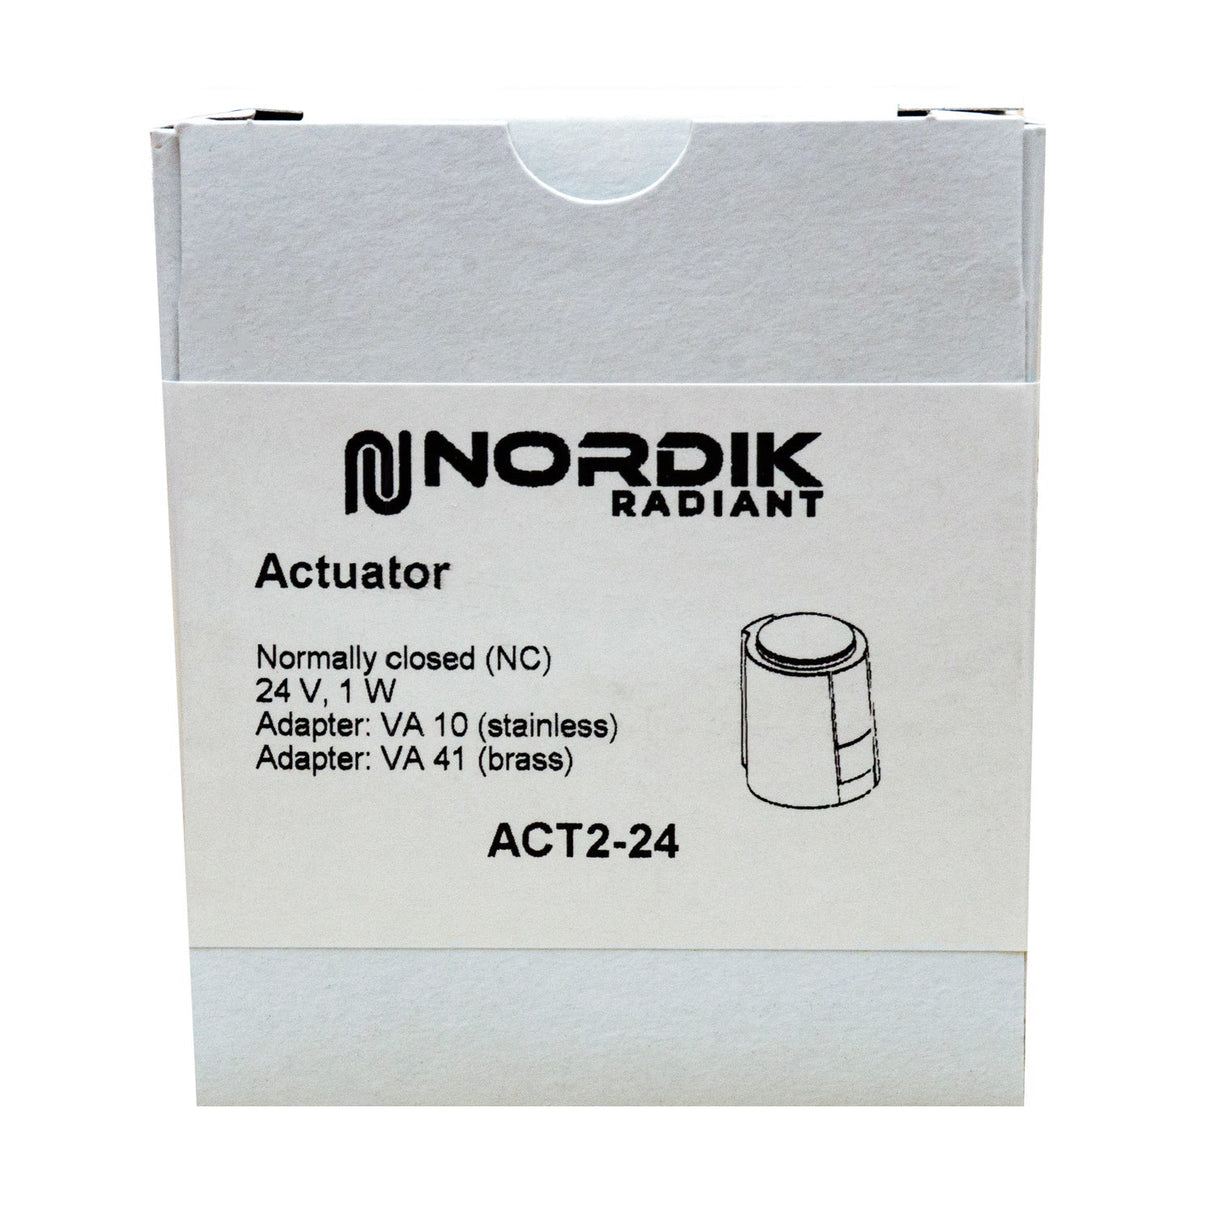 Nordik Radiant 2 wires actuator zone valve for water and glycol radiant floor manifold - box